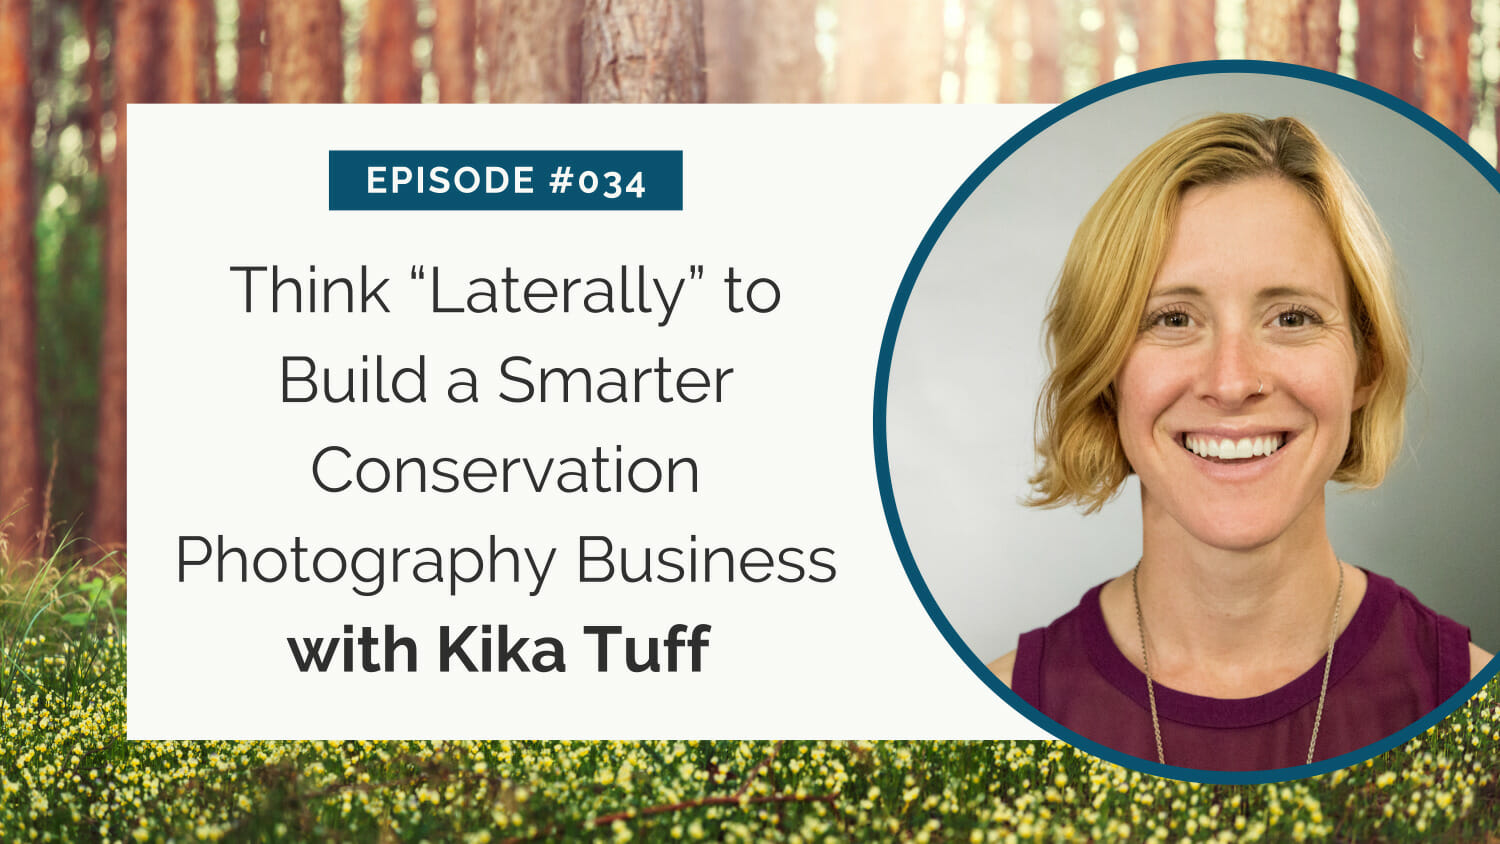 Woman featured in a promotional graphic for a podcast episode on building a smarter conservation photography business.